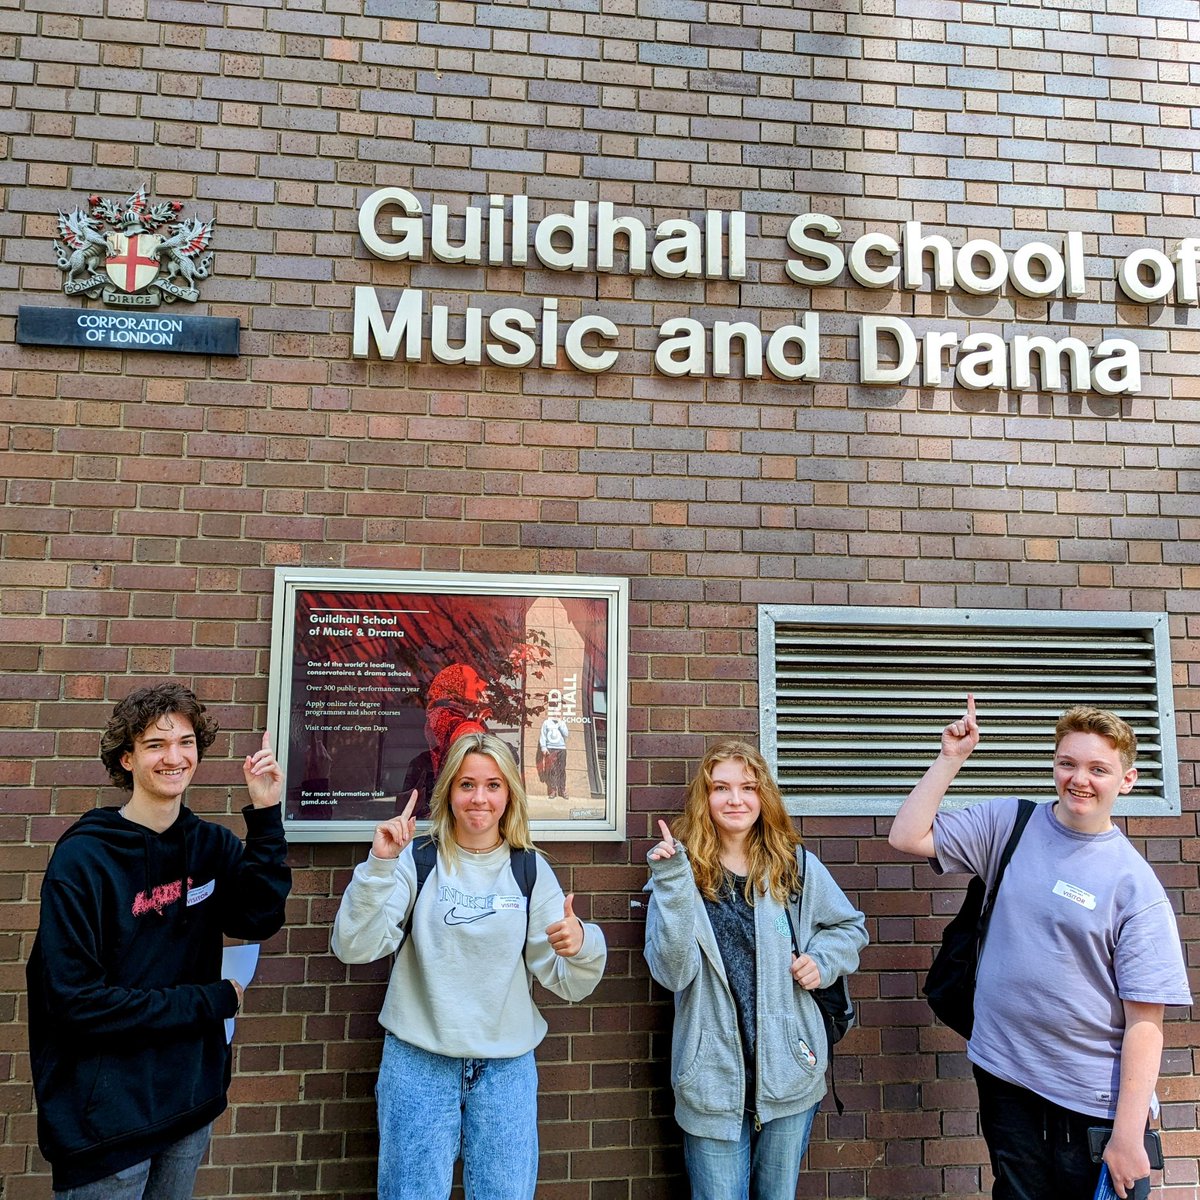 Today we took a few pupils to @guildhallschool for the Production Arts Open Day. What a great experience for our young theatre makers. Some excellent displays of technical theatre and stage management.  Very aspirational! #inspiringminds
#drama #theatre #stagemanagement